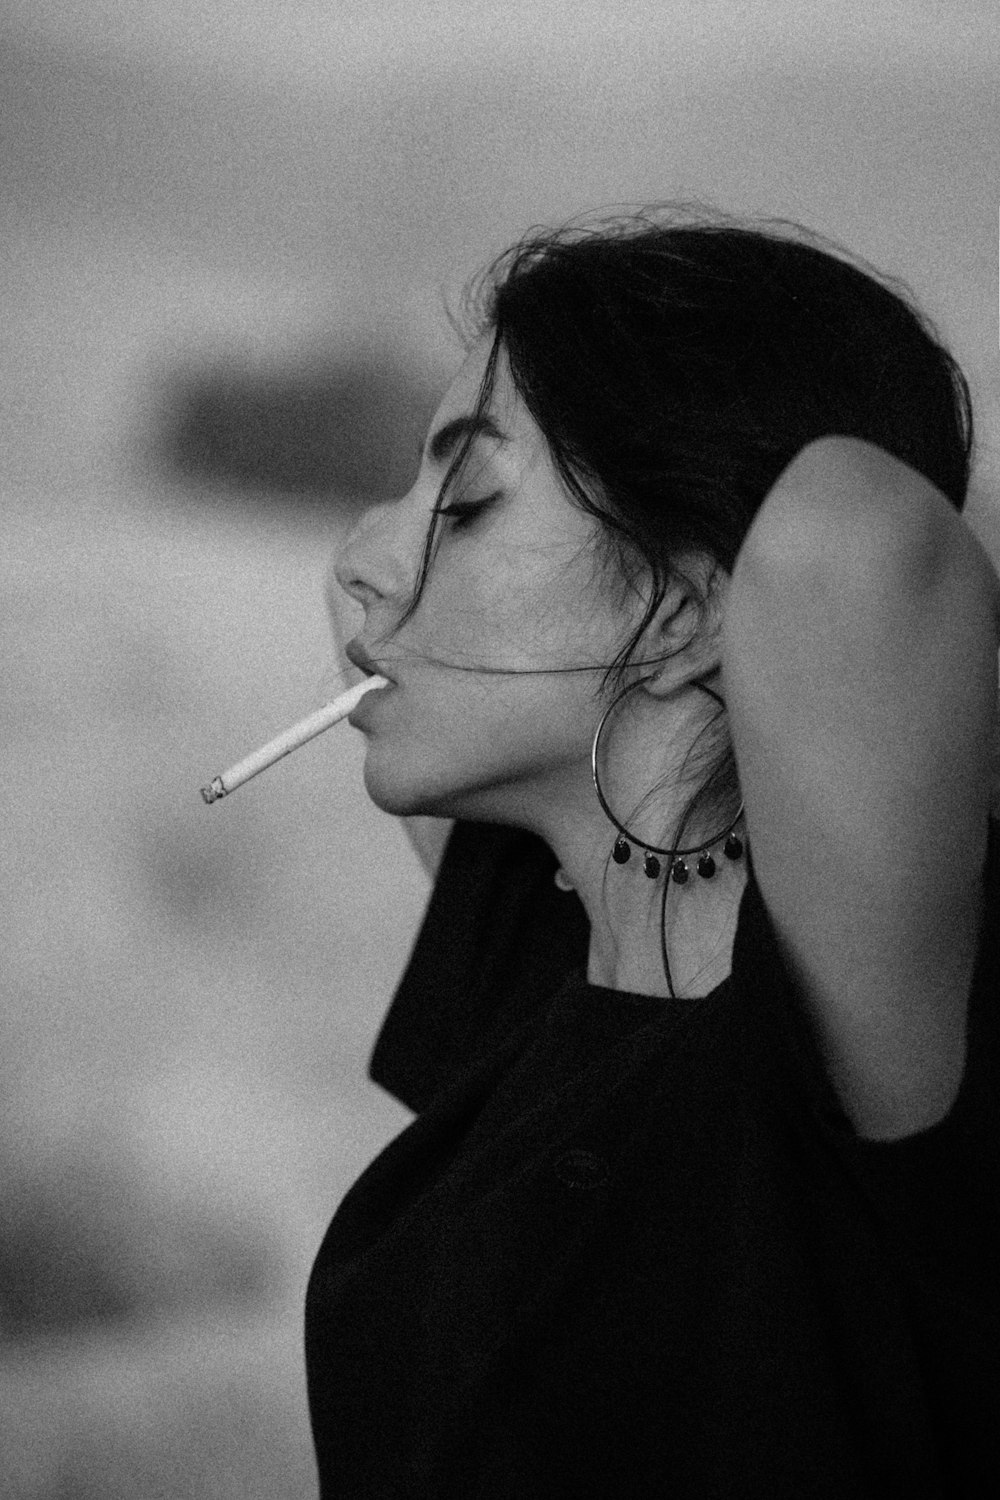 500+ Girl Smoking Pictures [HQ] | Download Free Images on Unsplash